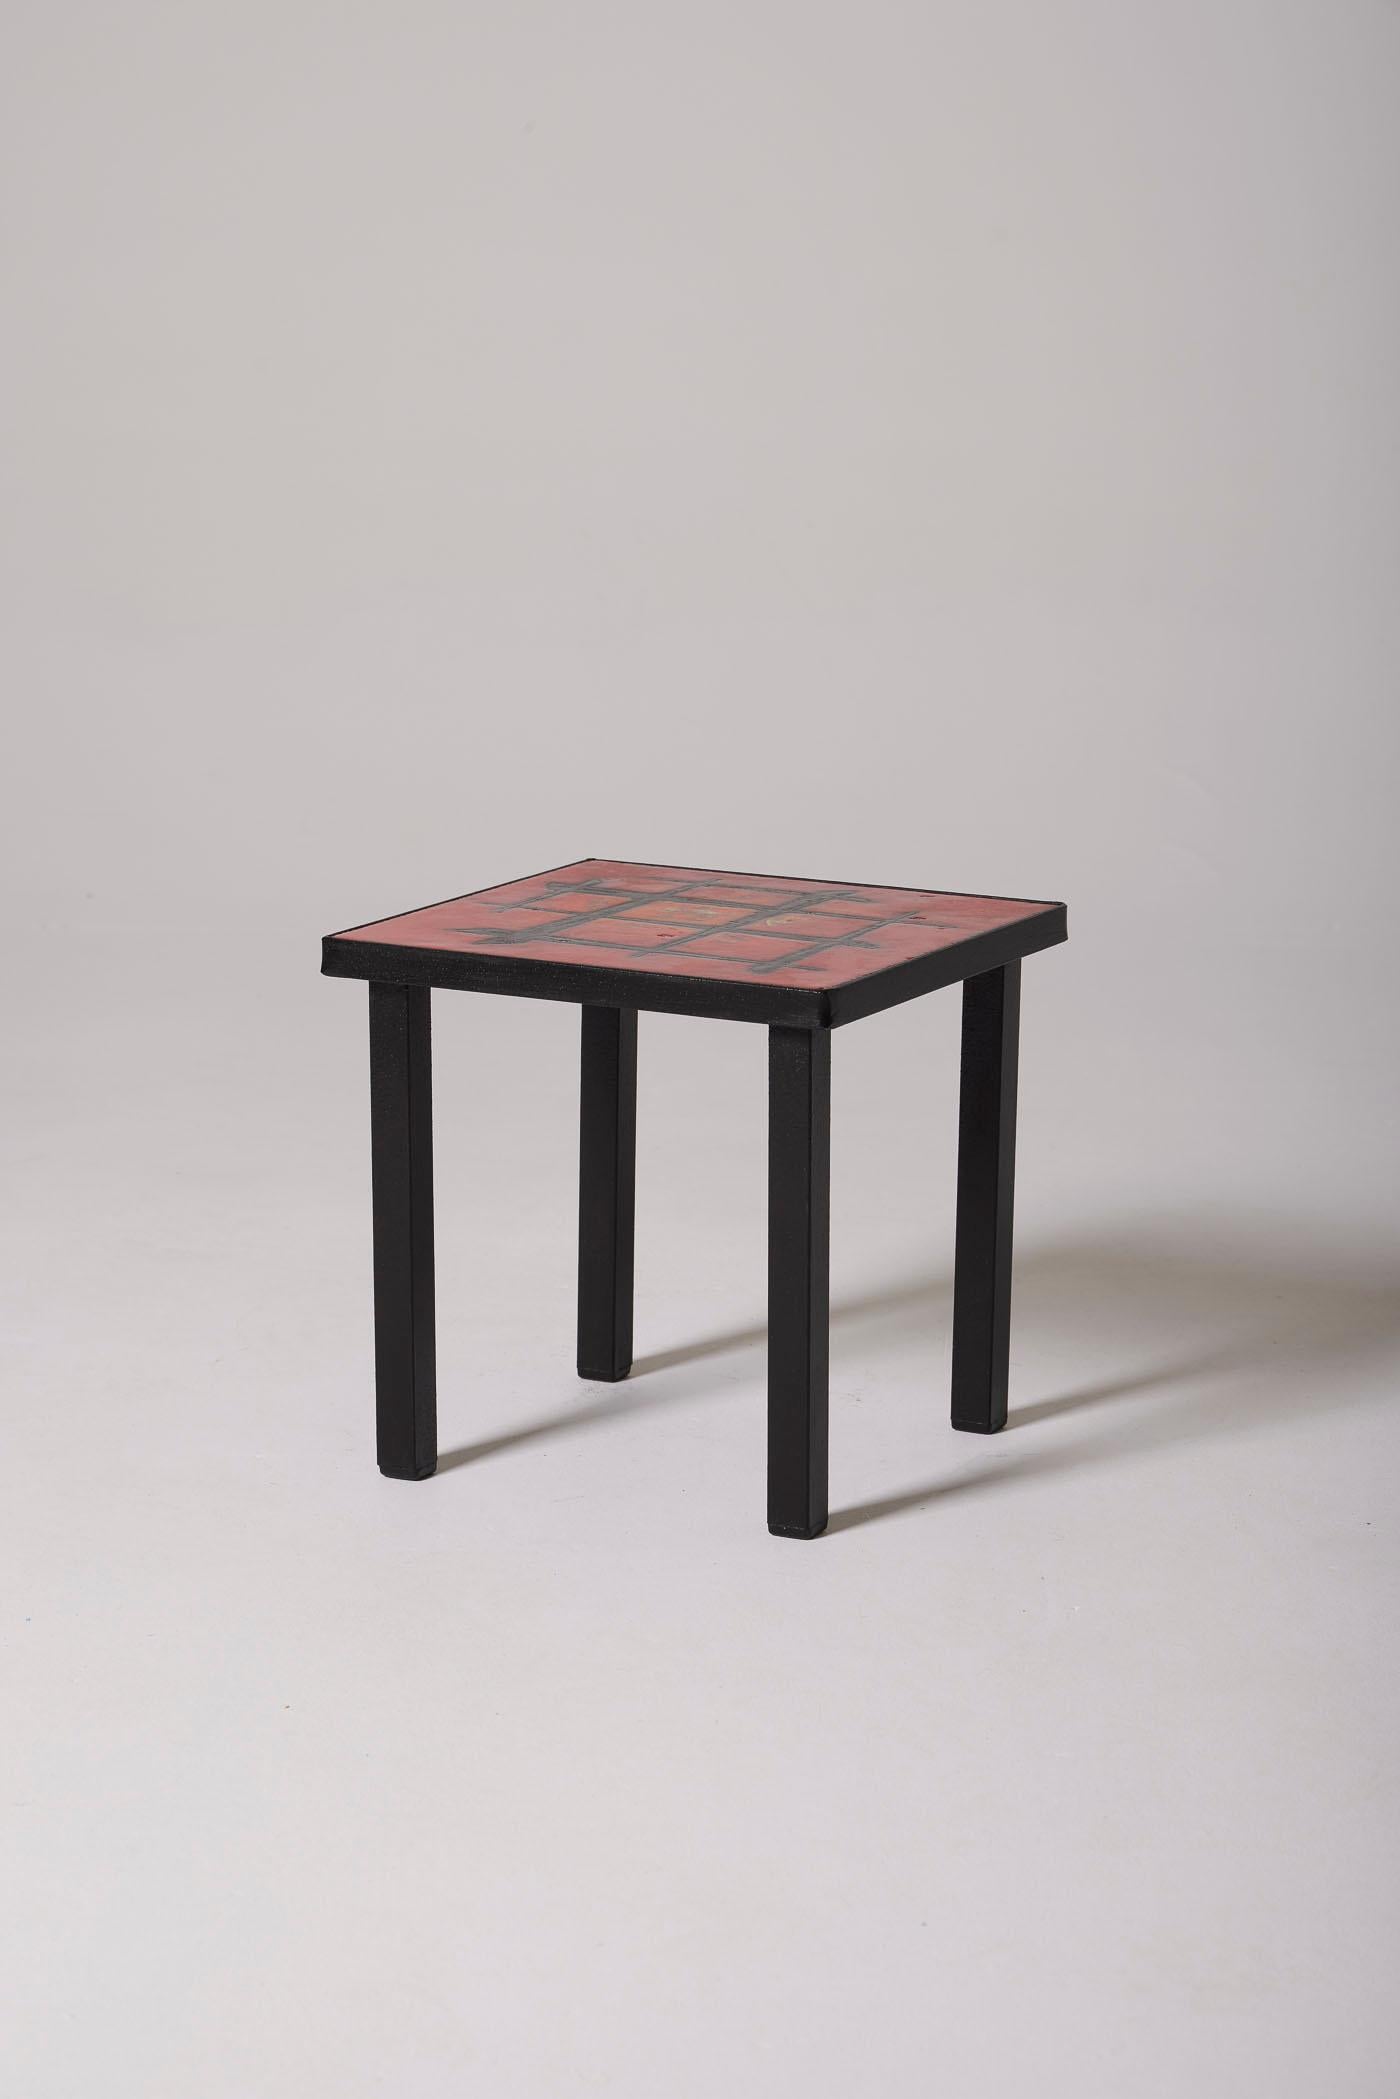 Coffee table or side table with red enameled lava tiles by ceramicists Robert and Jean Cloutier, 1950s. The geometrically decorated top rests on a black lacquered metal base. In perfect condition.
DV493